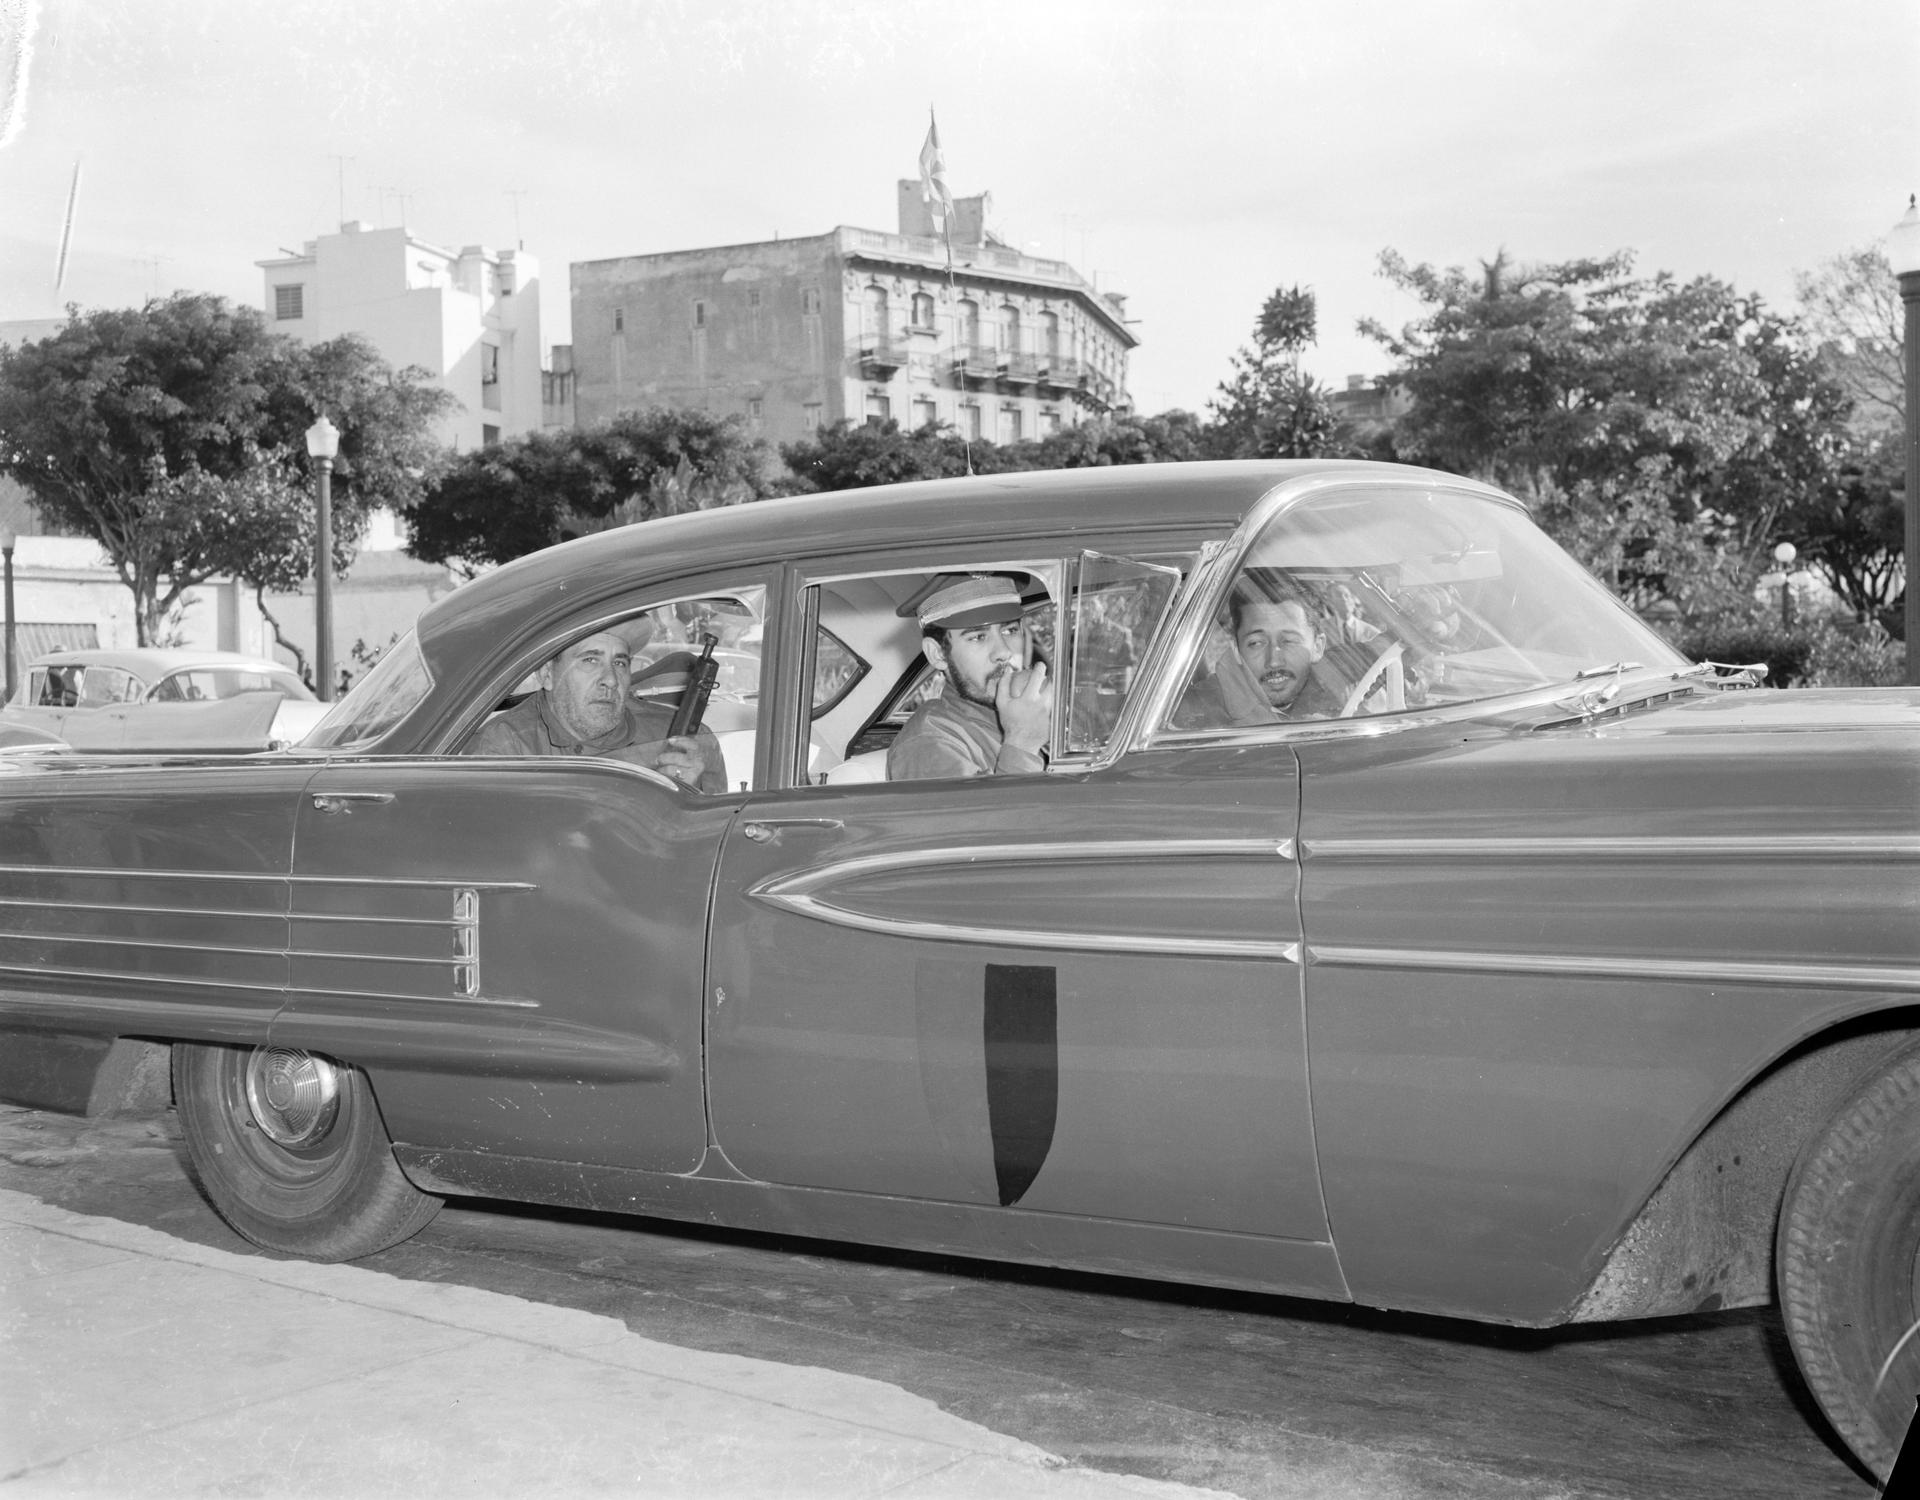 January 1959 - Havana, Cuba - In an automobile that used to be in the service of ex-dictator Batista, three soldiers of the 